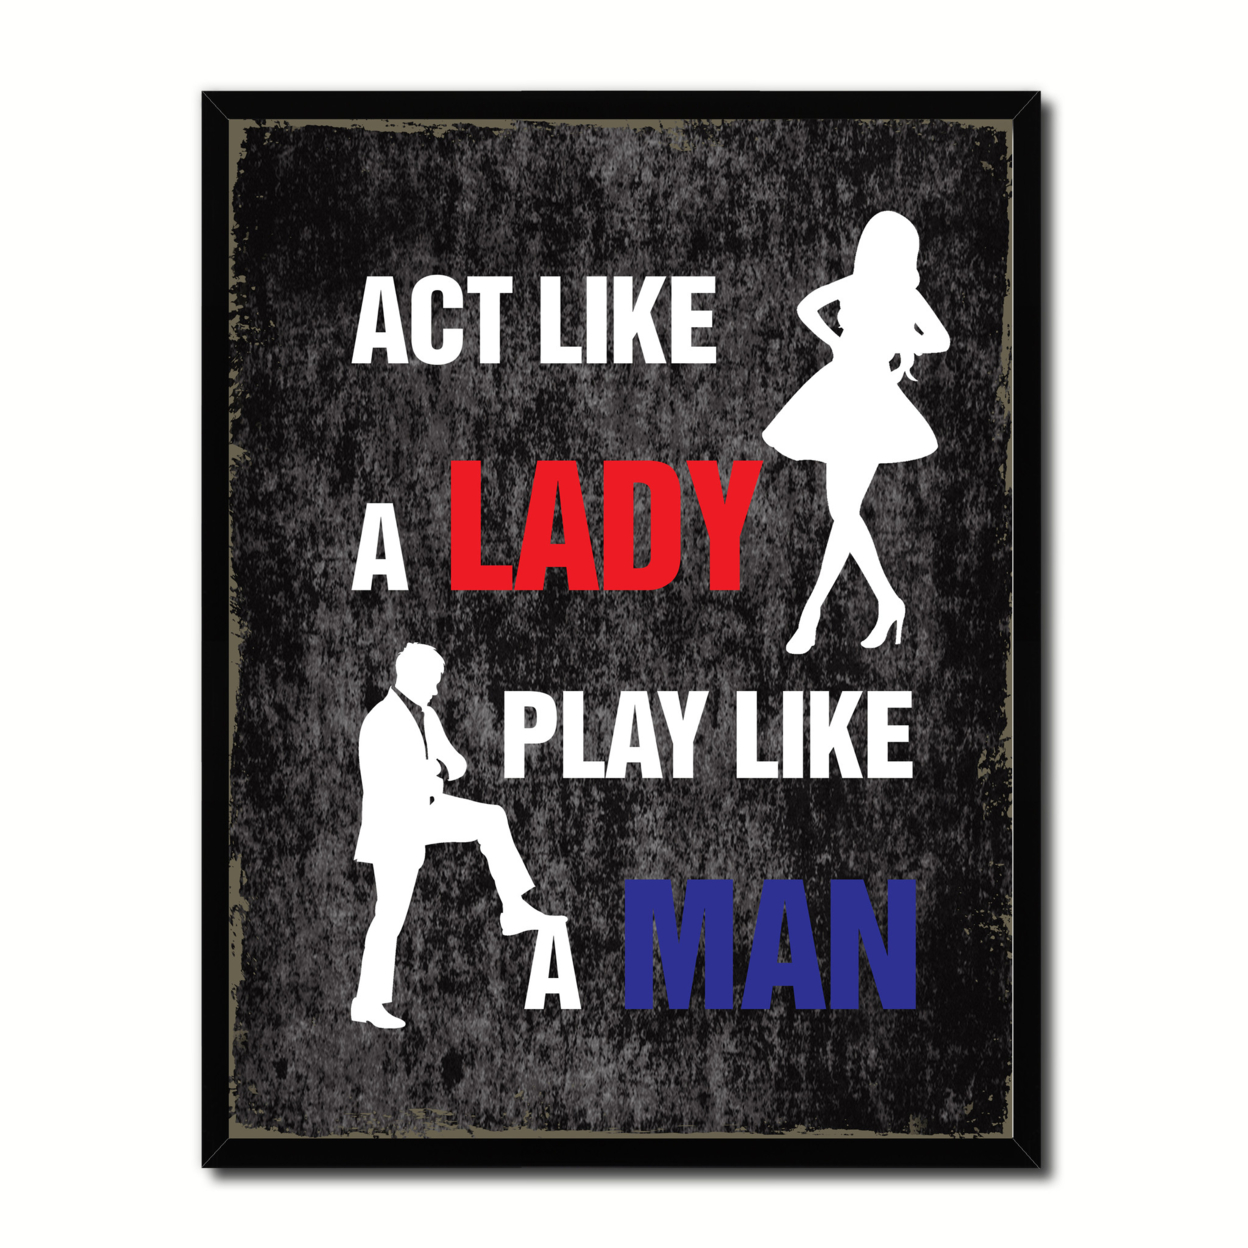 Act Like A Lady Play Like A Man Funny Typo Sign 17001 Picture Frame Gifts Home Decor Wall Art Canvas Print - 13"x17"